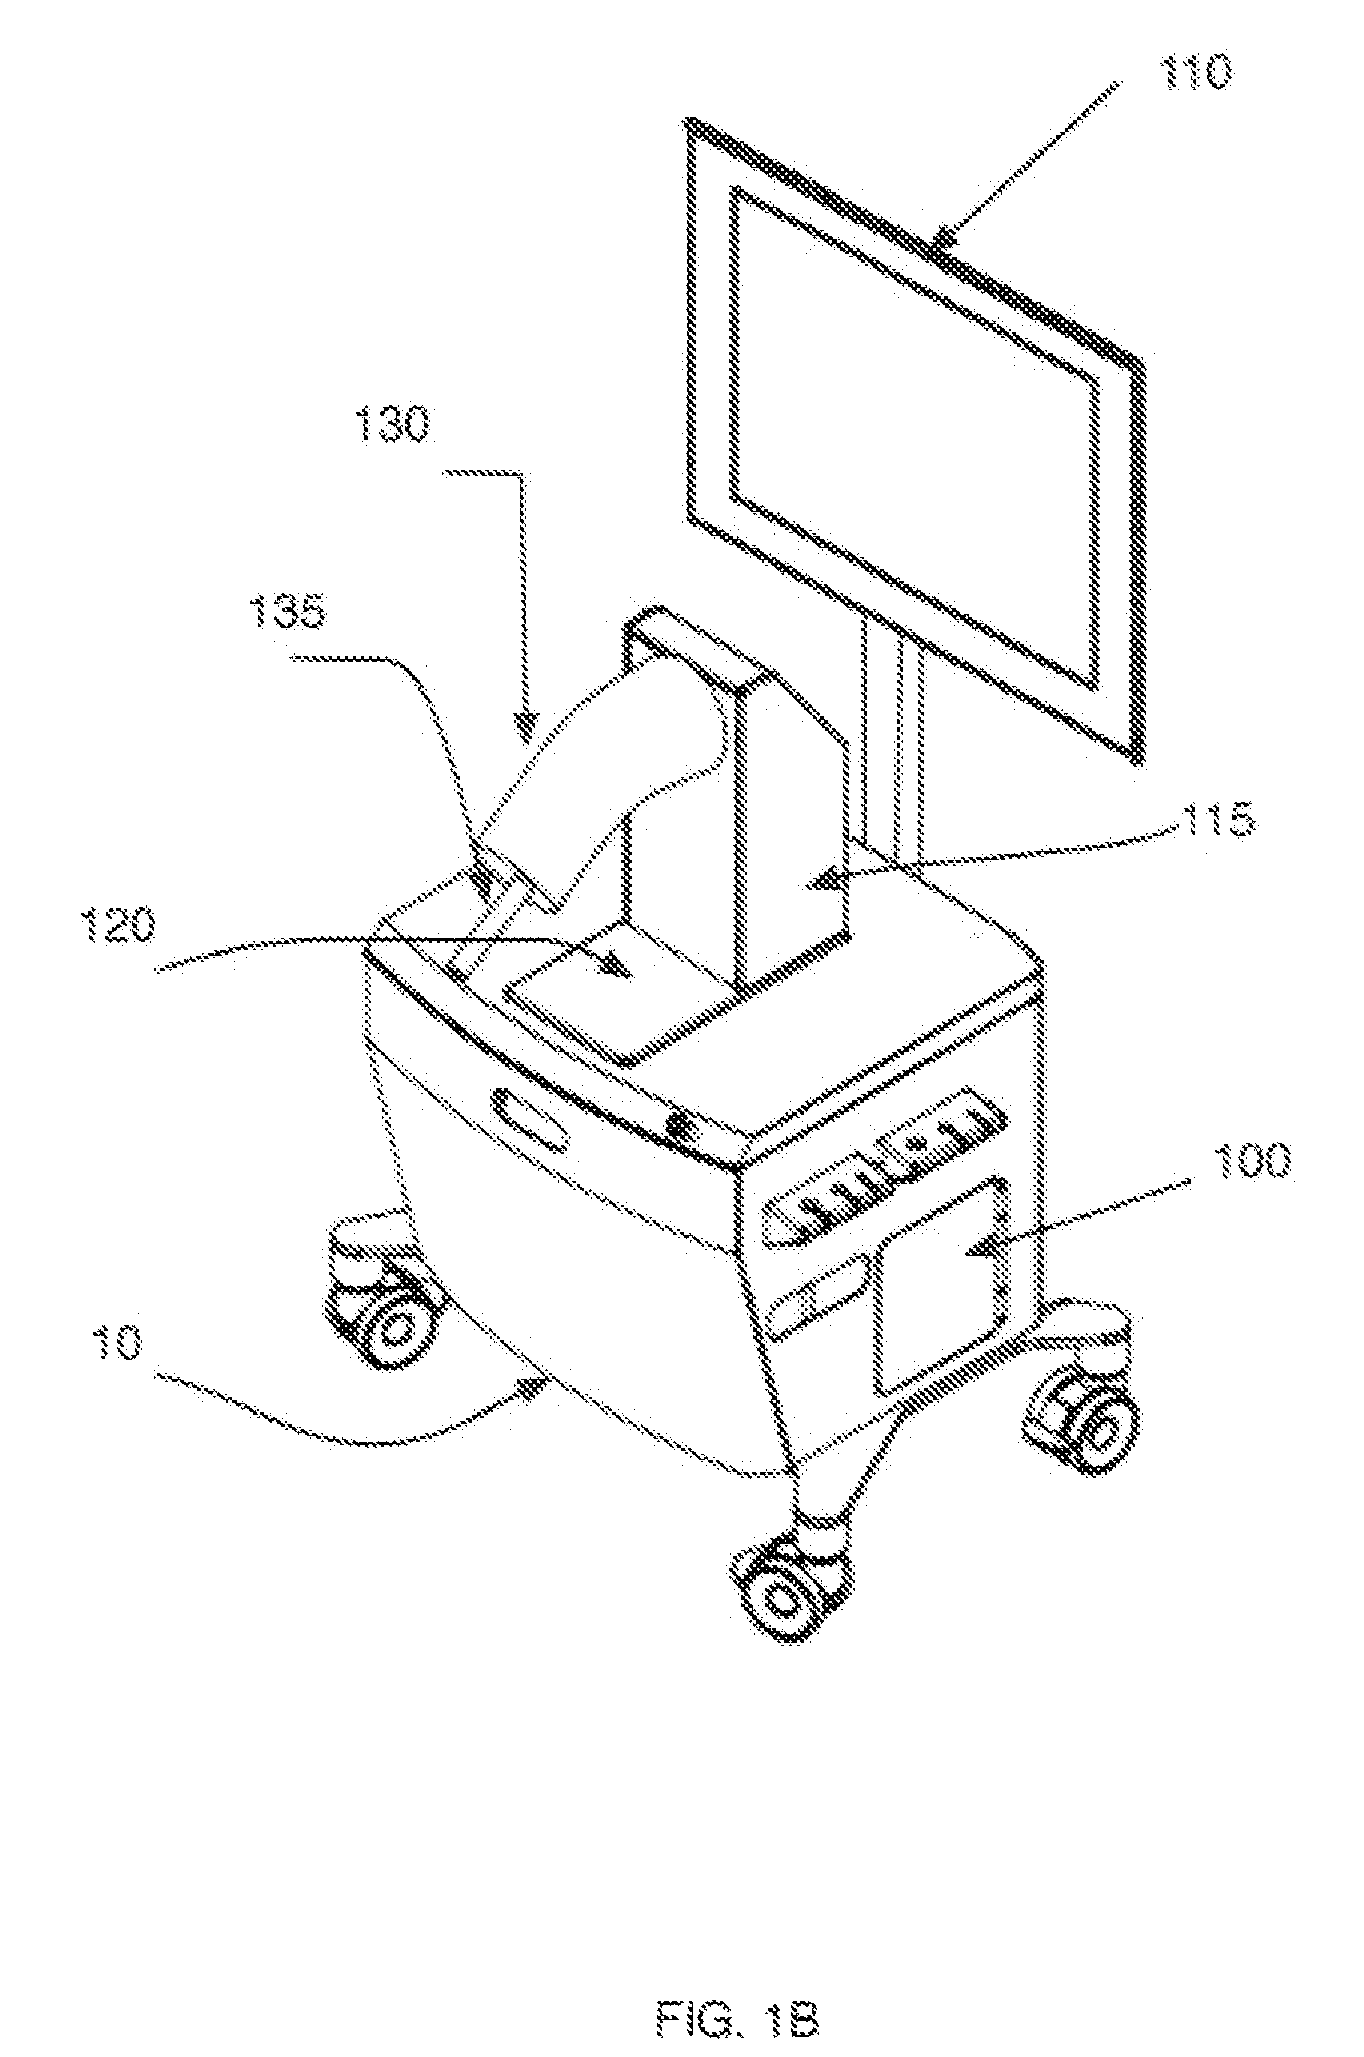 Medical simulation system and method with configurable anatomy model manufacturing